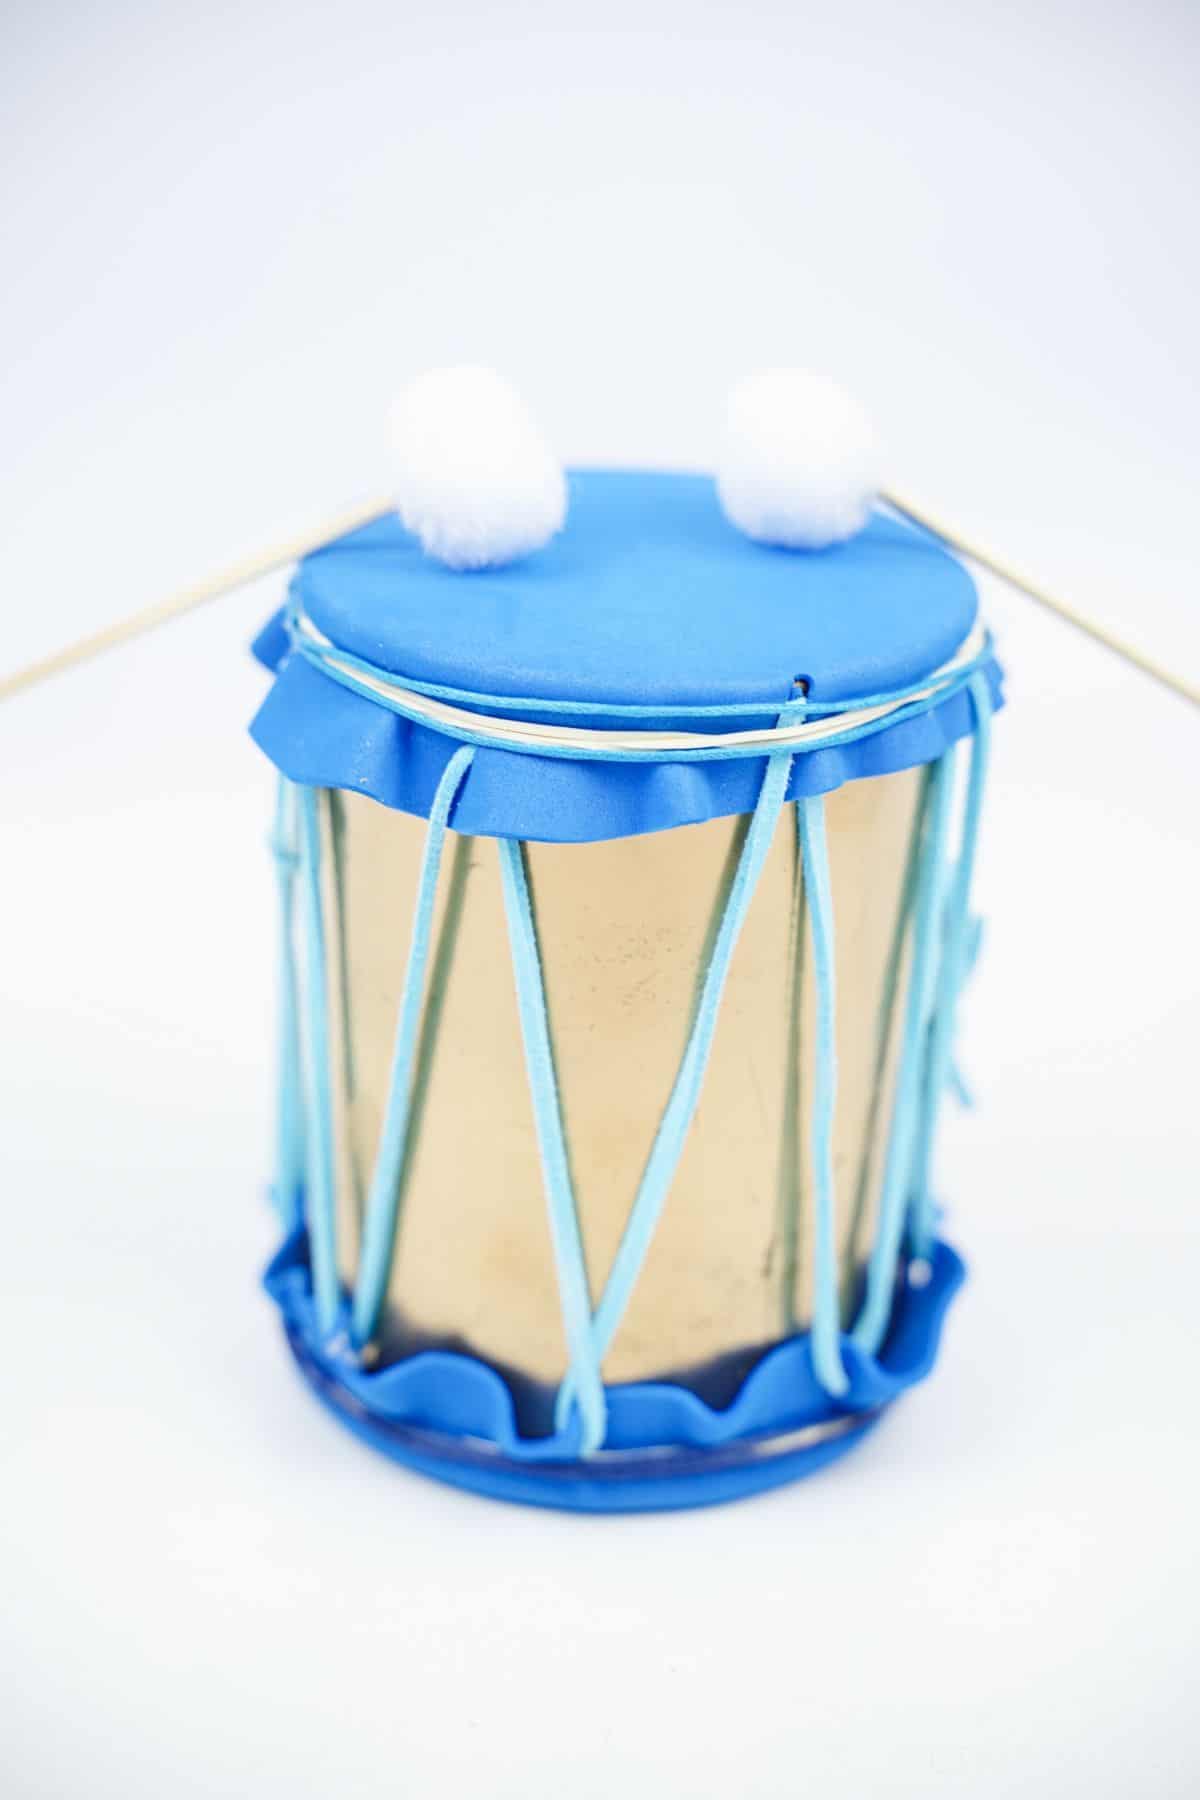 blue and gold mini drum on white table